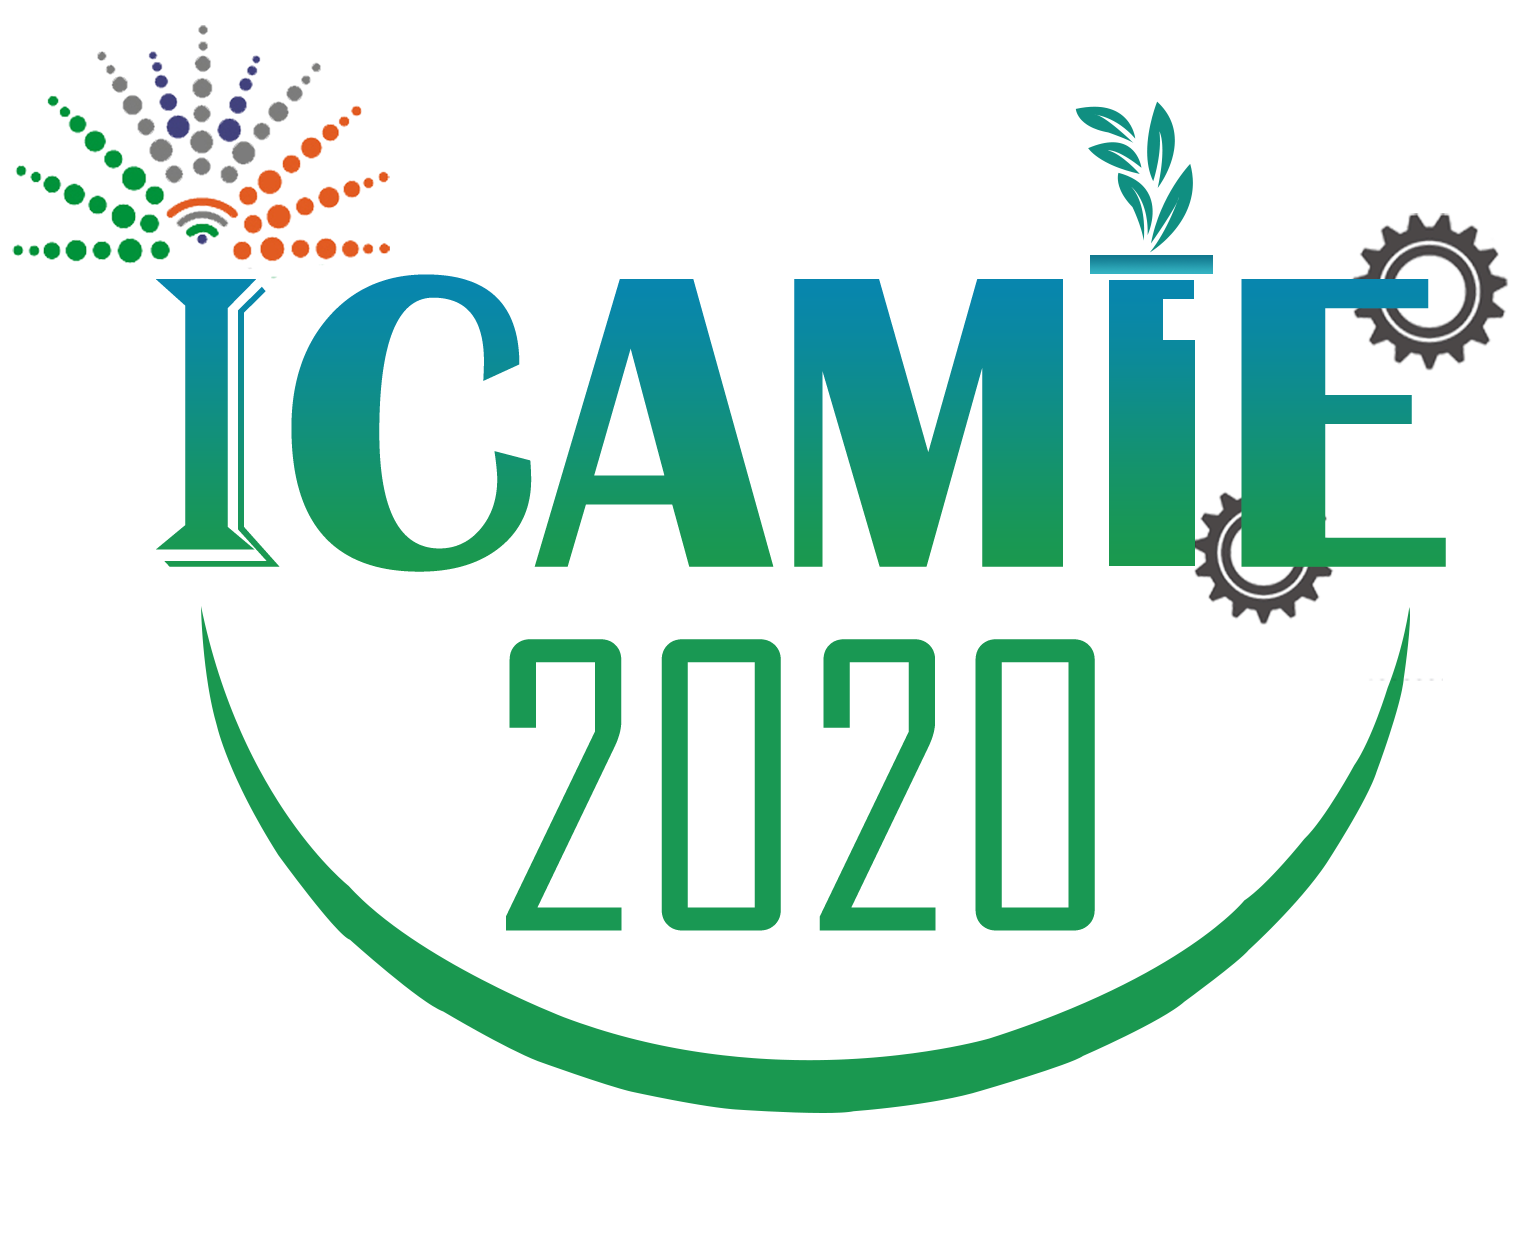 About ICAMIE-2020